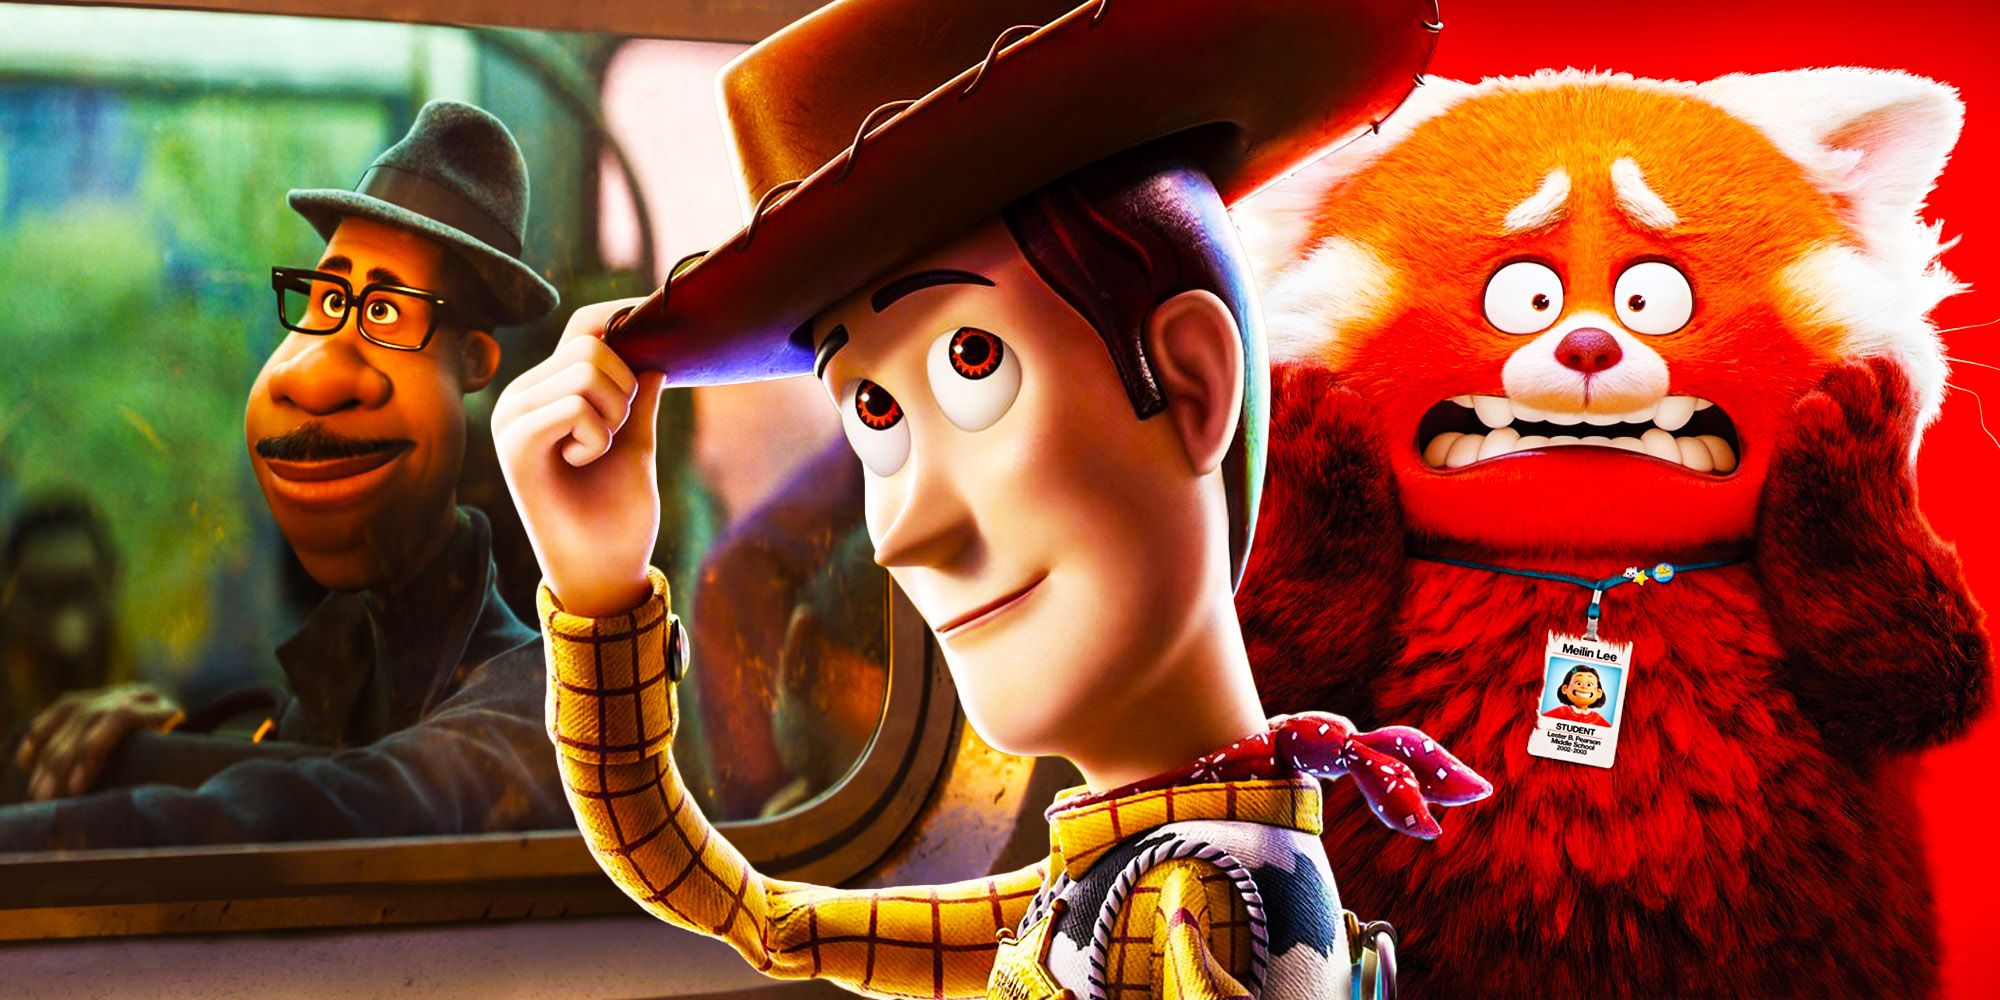 Pixar Movies ranked best to worst soul toy story 4 turning red